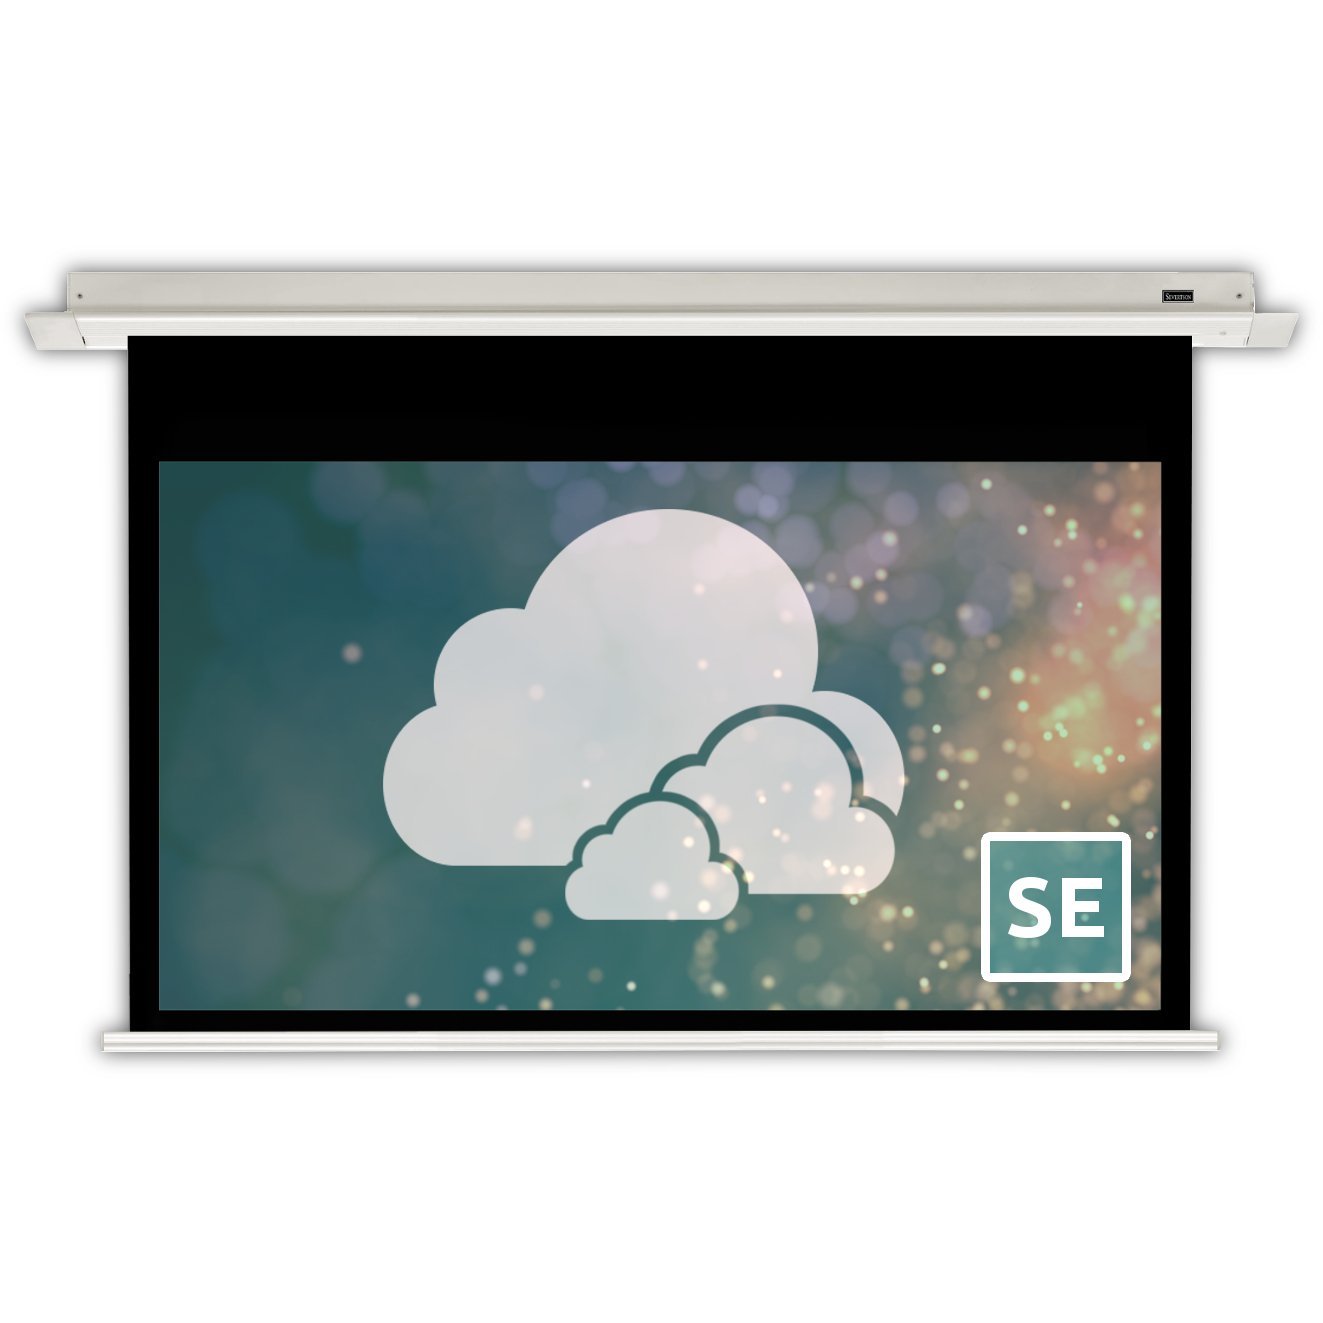 Spirit Series in-ceiling electric Screens from Severtson Screens are ideal for multi-usage environments such as hospitals, houses of worship, conference rooms, classrooms, or training rooms, where the screen needs to be hidden for aesthetic or functional reasons.